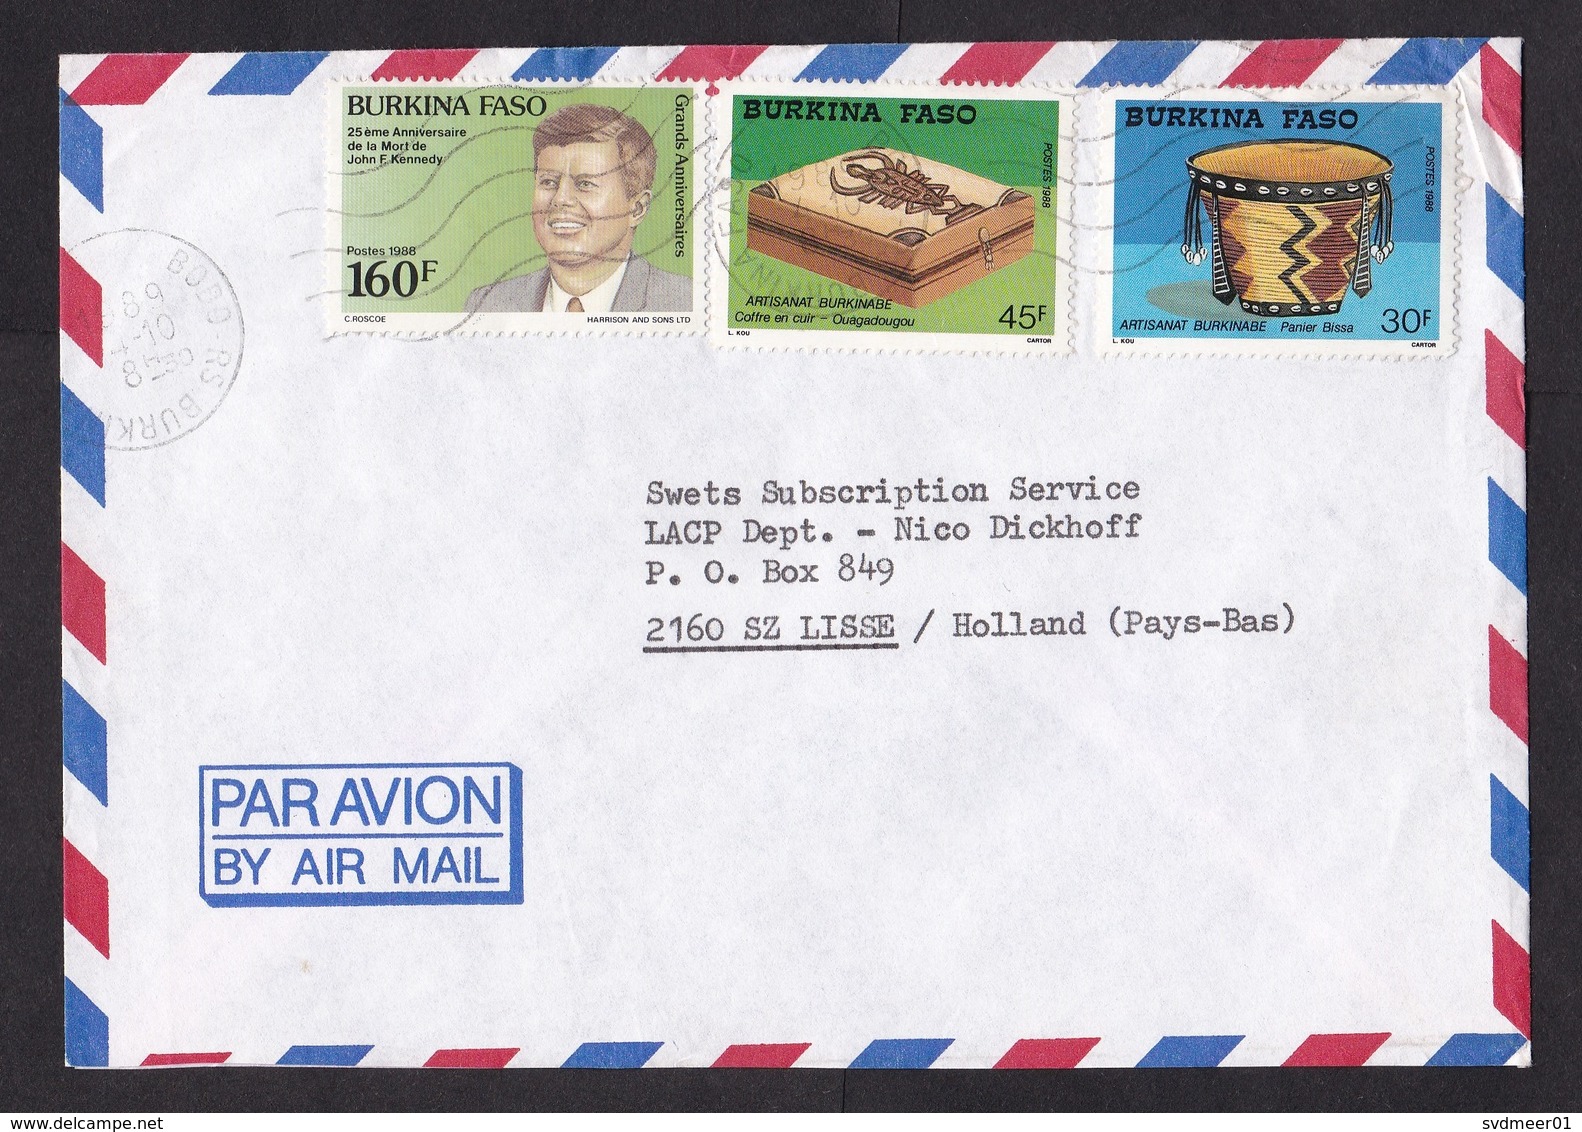 Burkina Faso: Airmail Cover To Netherlands, 1989, 3 Stamps, JFK, Kennedy, Wood Crafts, Rare Real Use (traces Of Use) - Burkina Faso (1984-...)